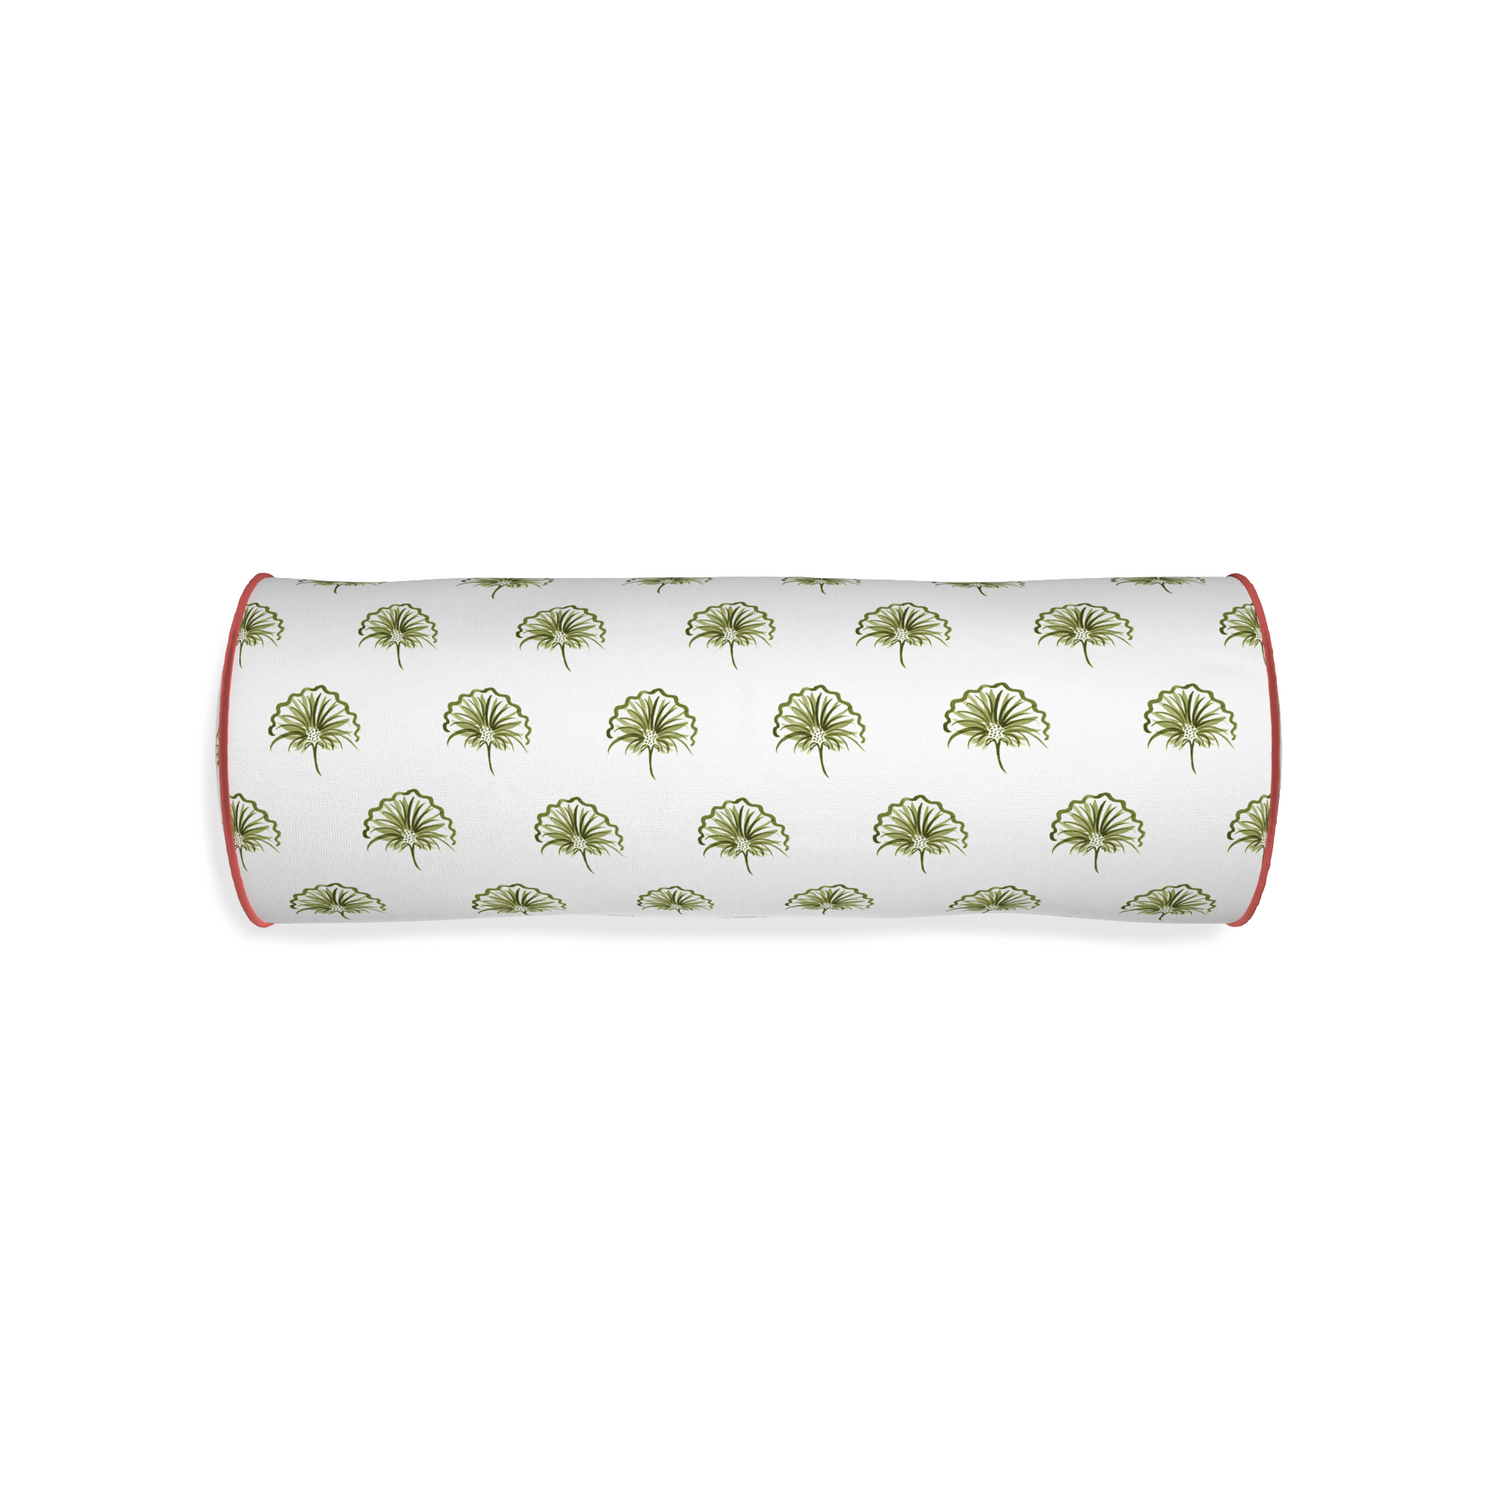 Bolster penelope moss custom green floralpillow with c piping on white background